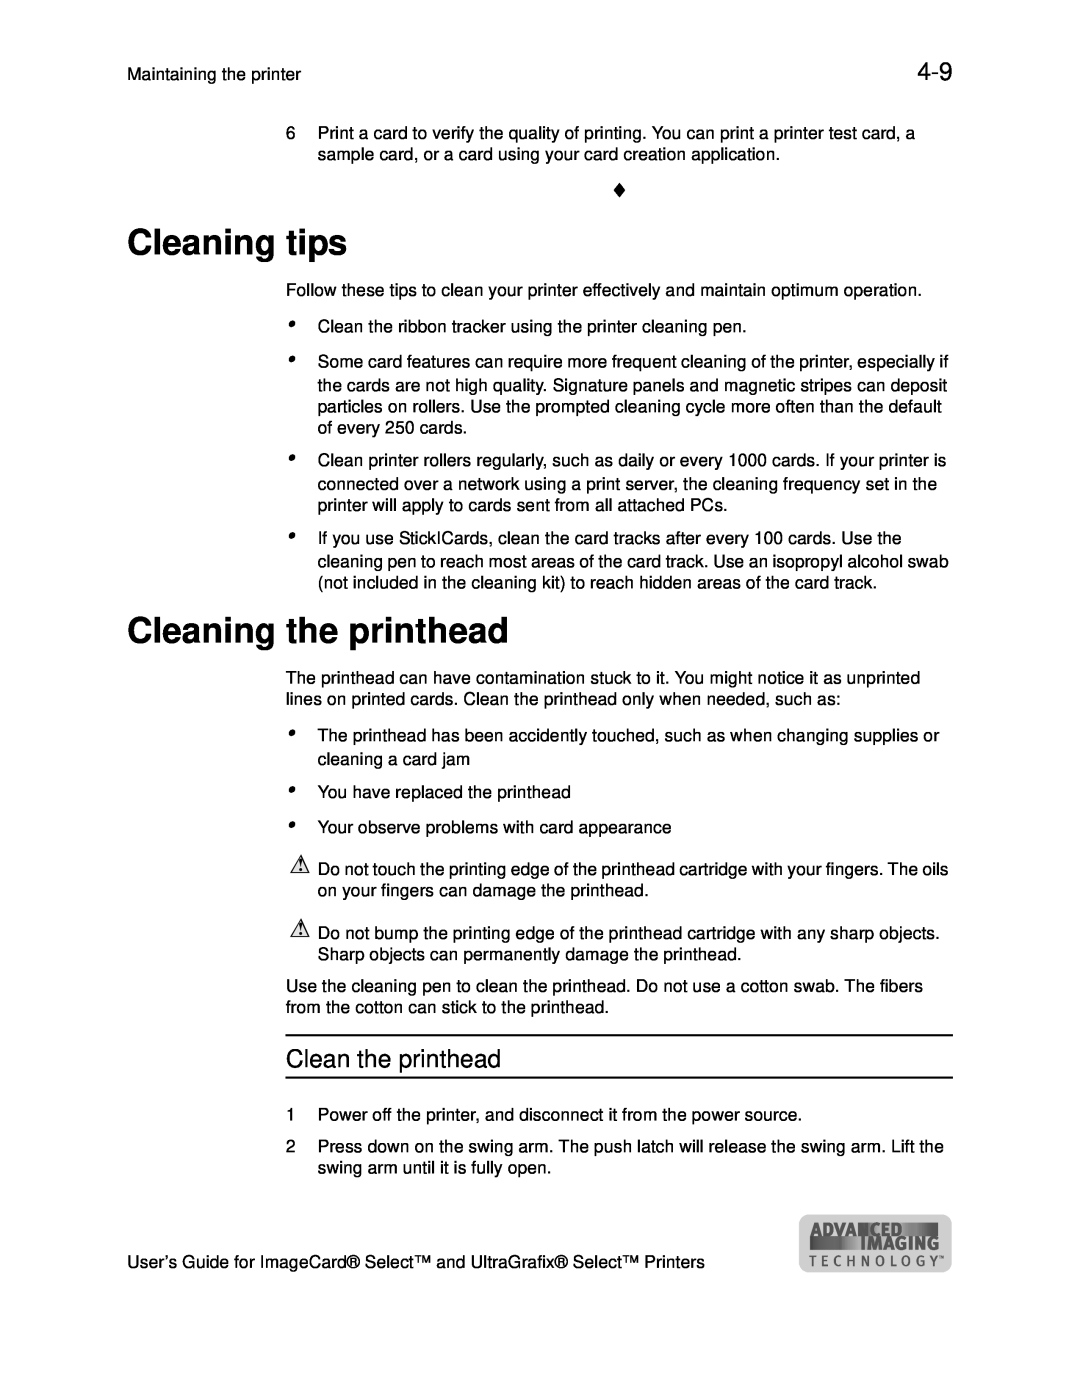 Datacard Group ImageCard SelectTM and UltraGrafix SelectTM Printers manual Cleaning tips, Cleaning the printhead 